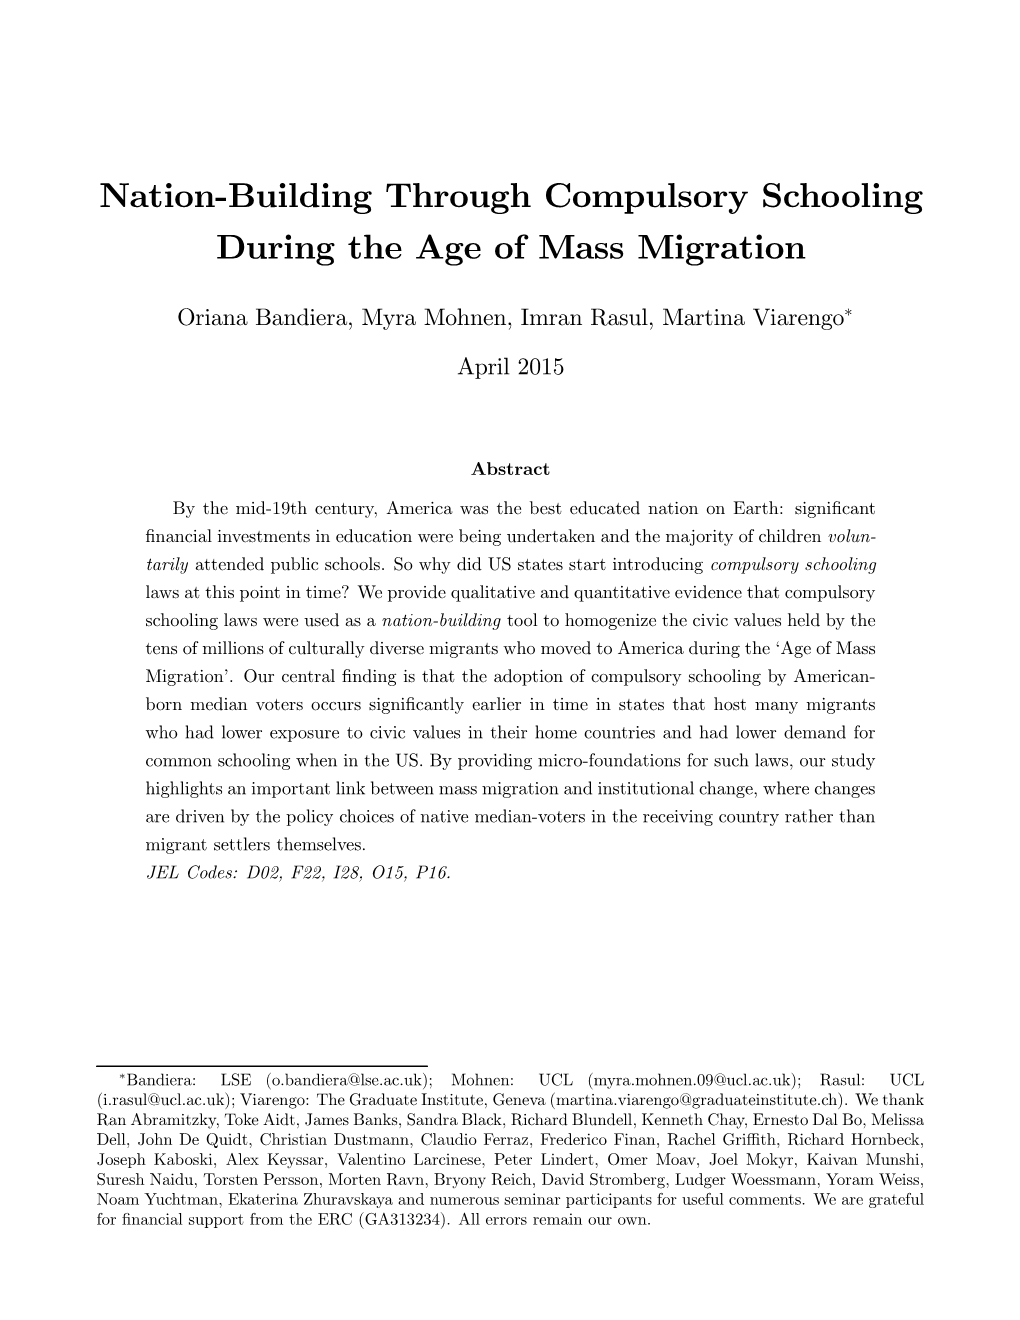 Nation-Building Through Compulsory Schooling During the Age of Mass Migration